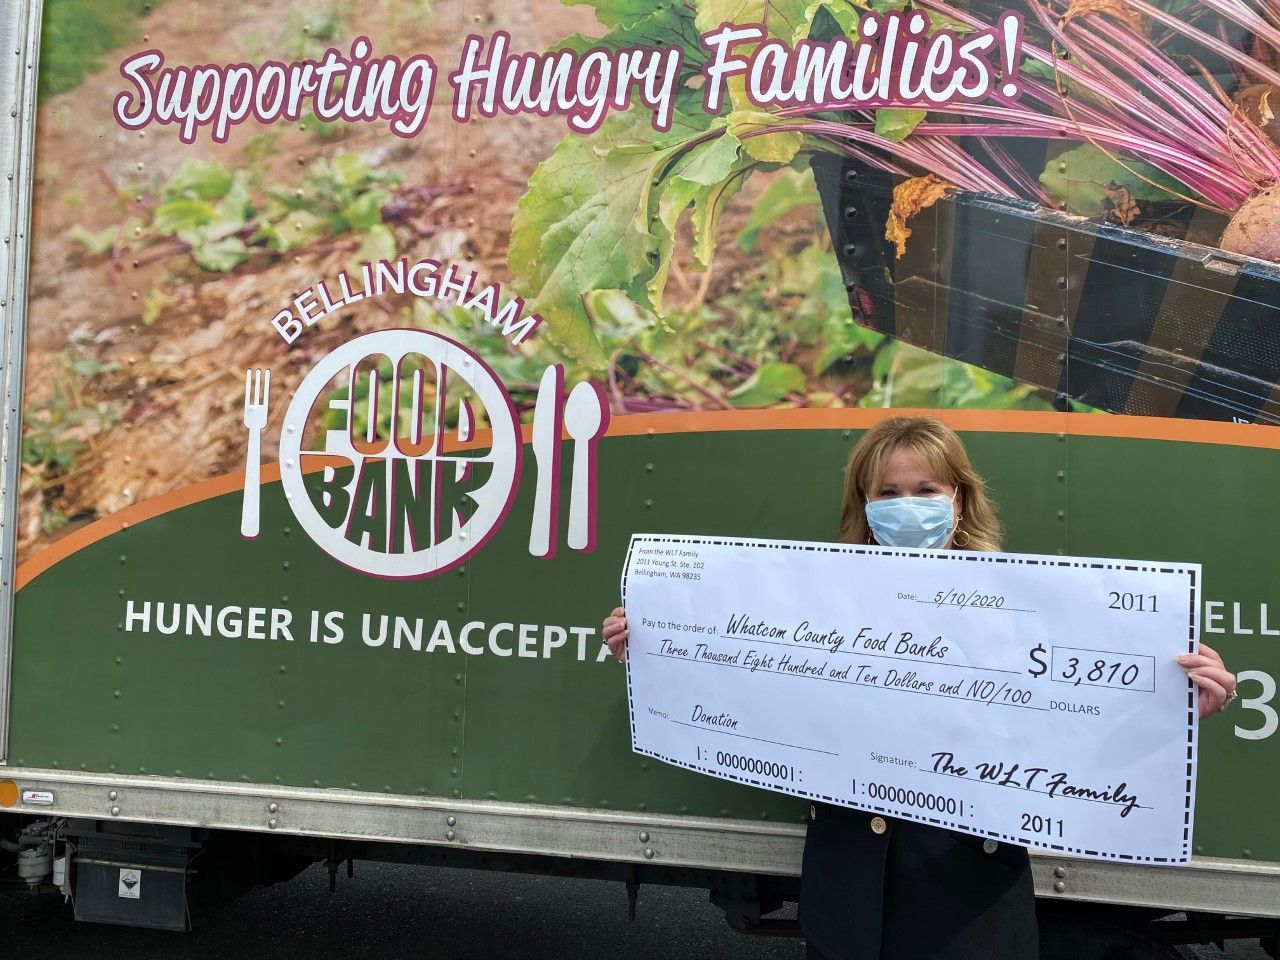 Whatcom Land Title Co. and its employees give $3,810 to food banks